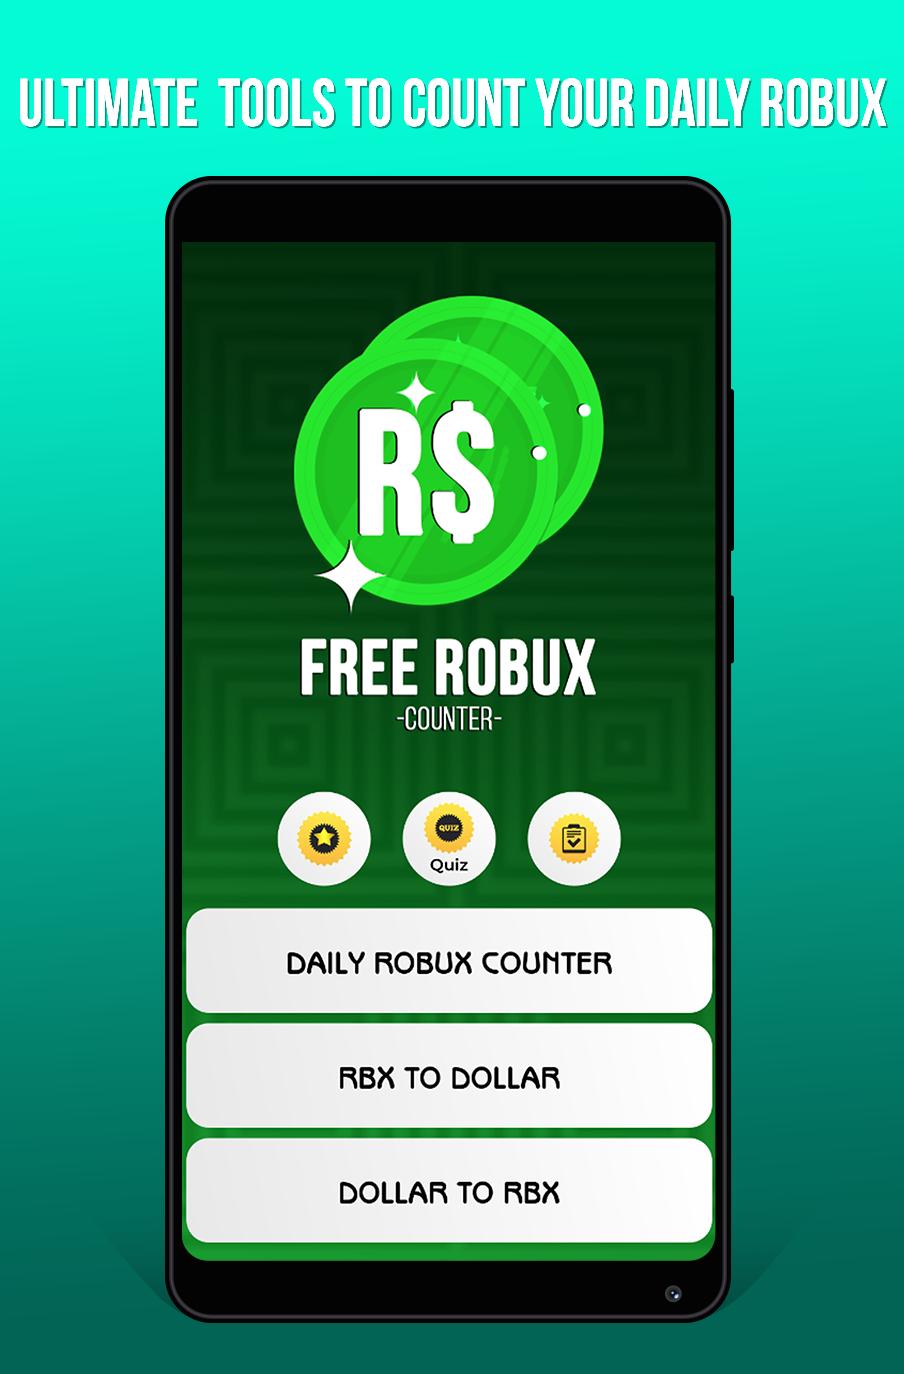 Ultimate Free Robux Counter For Roblox Rbx Calc For Android Apk Download - simbolo de robux